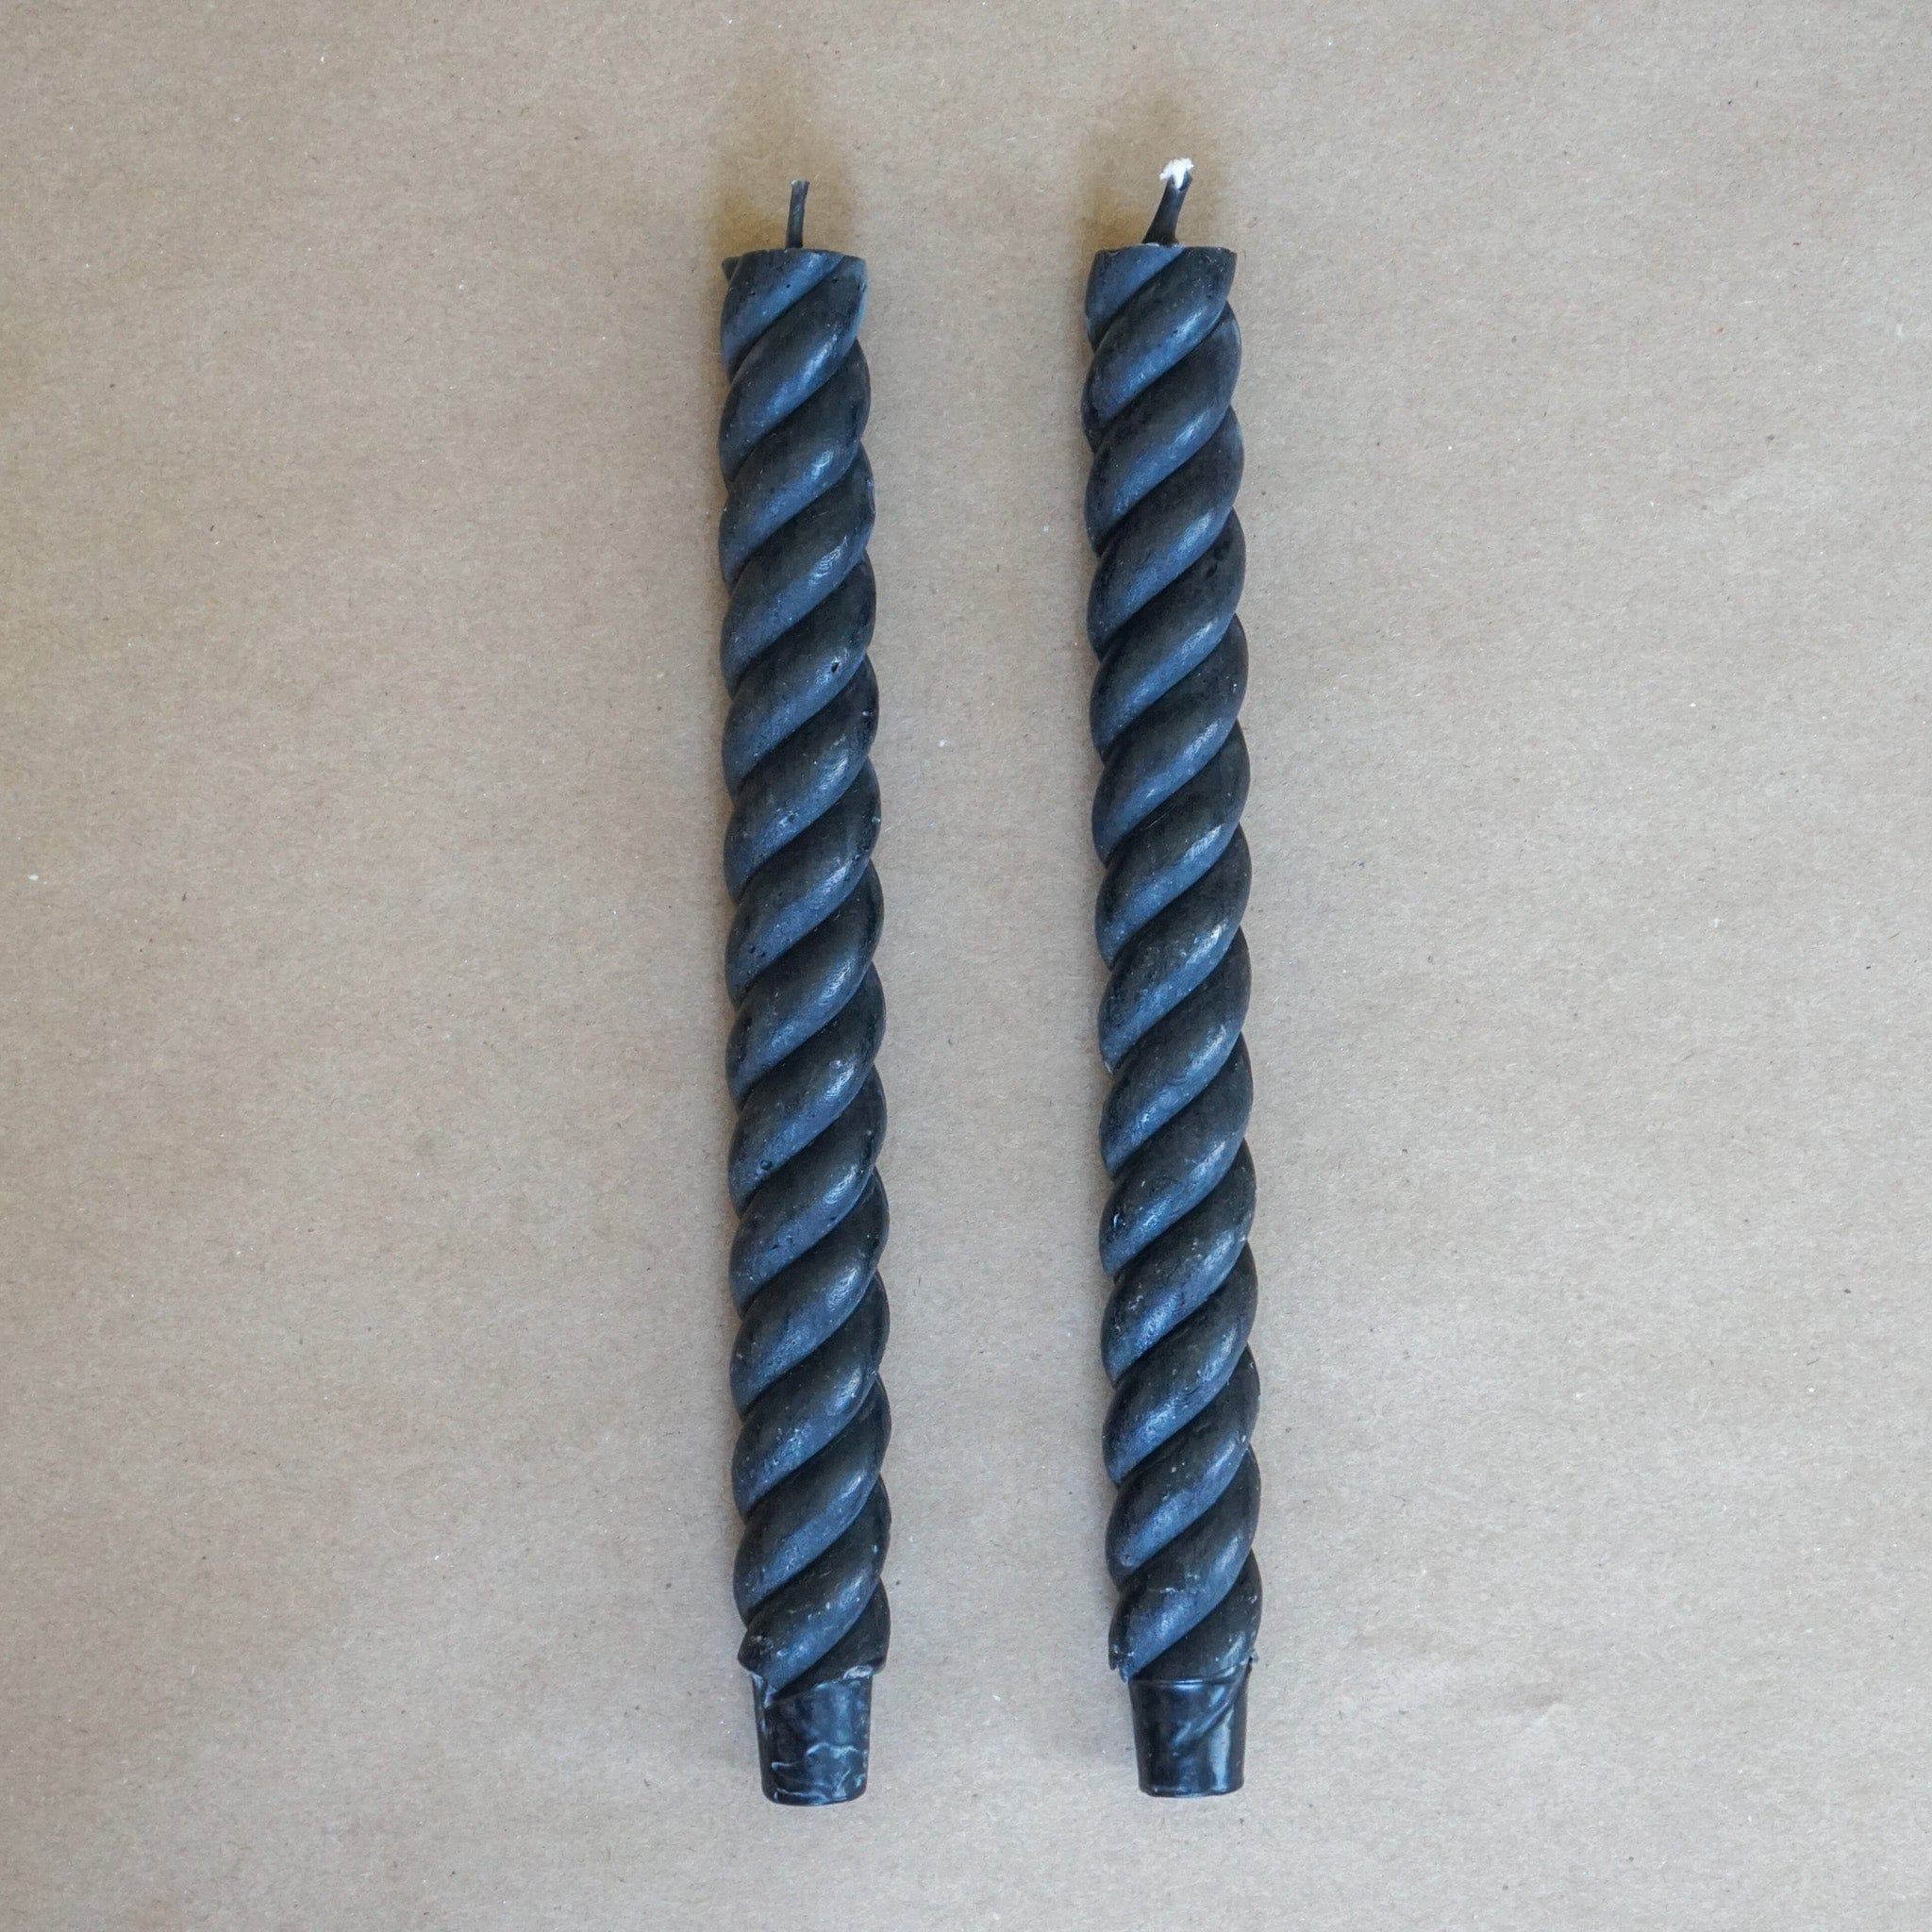 GREENTREE CANDLES Decor Black Rope Taper Candles by Greentree